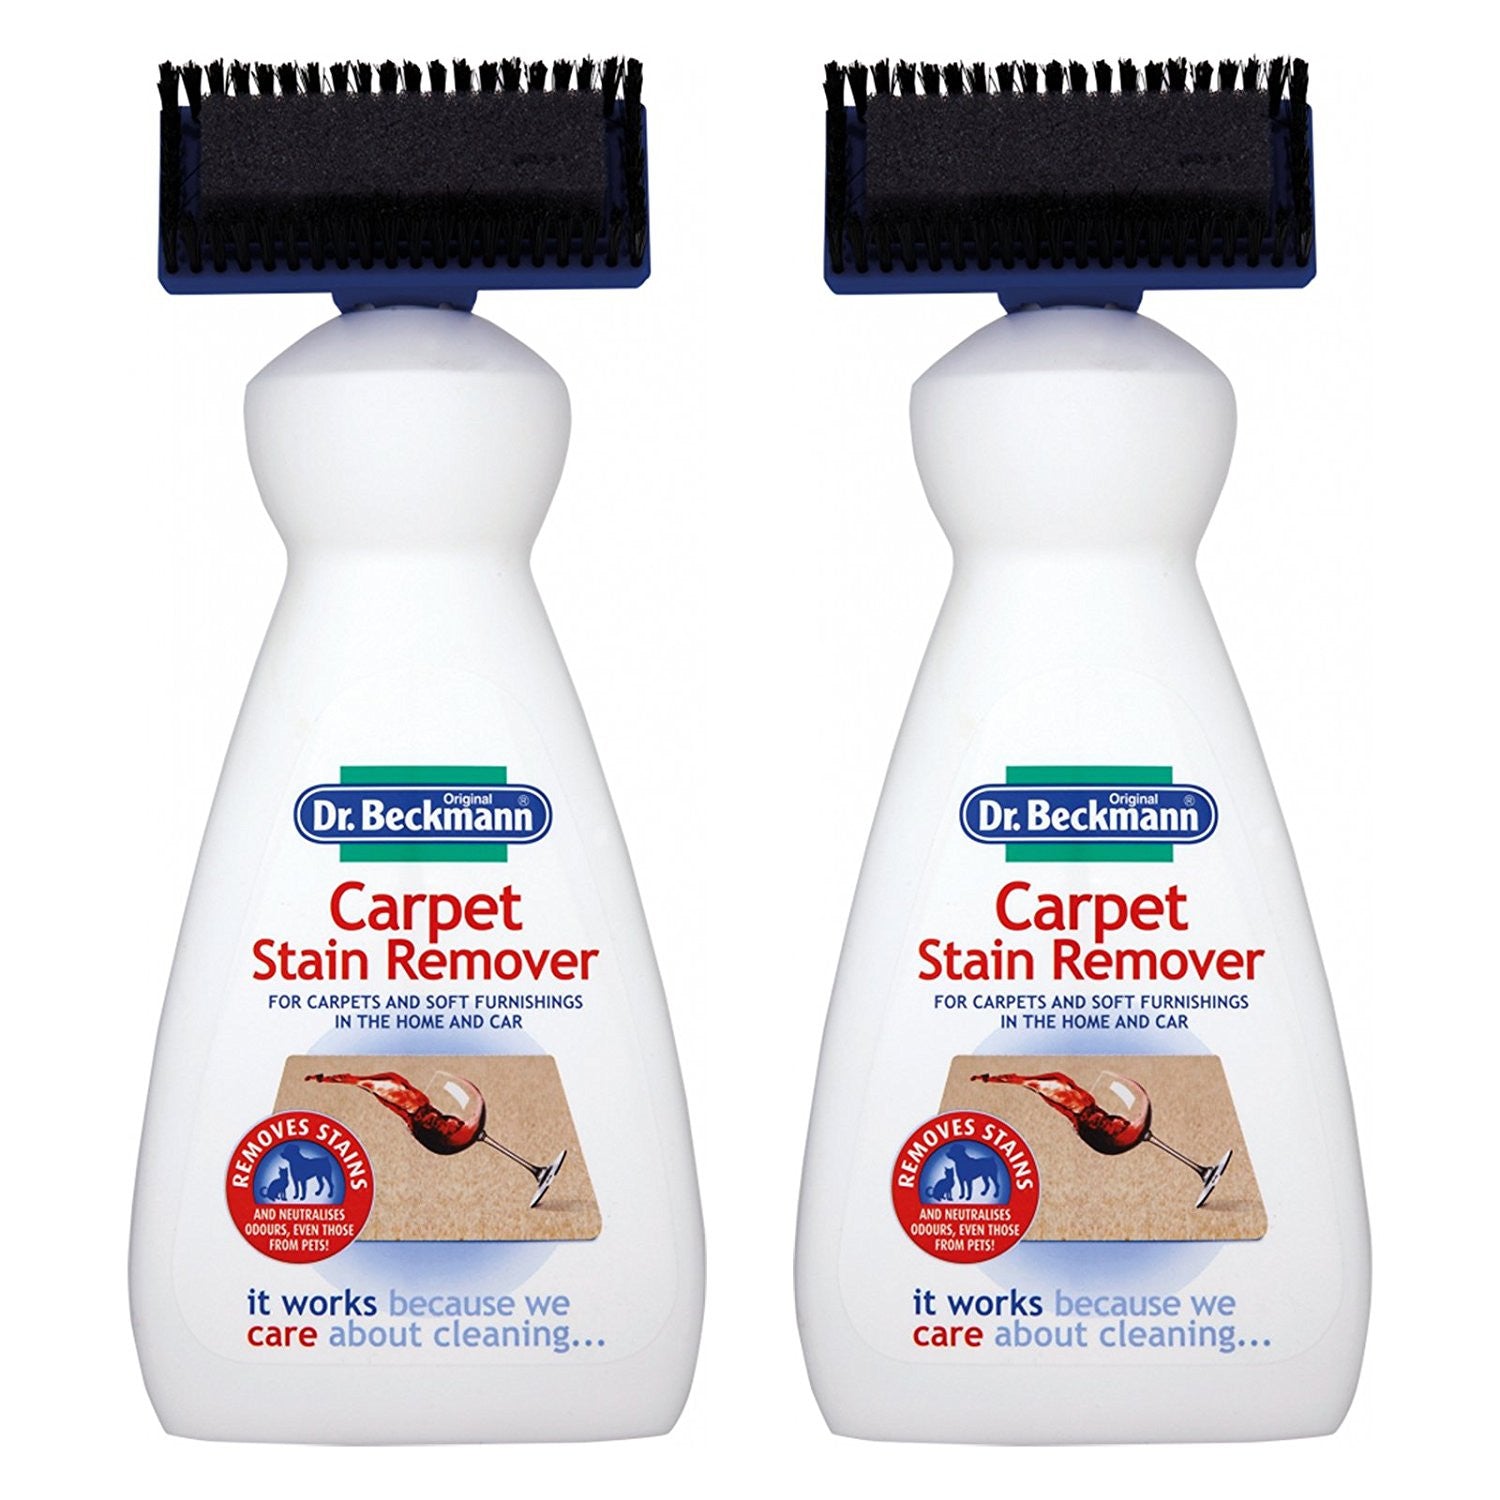 Dr. Beckmann Carpet Stain remover with cleaning applicator/brush